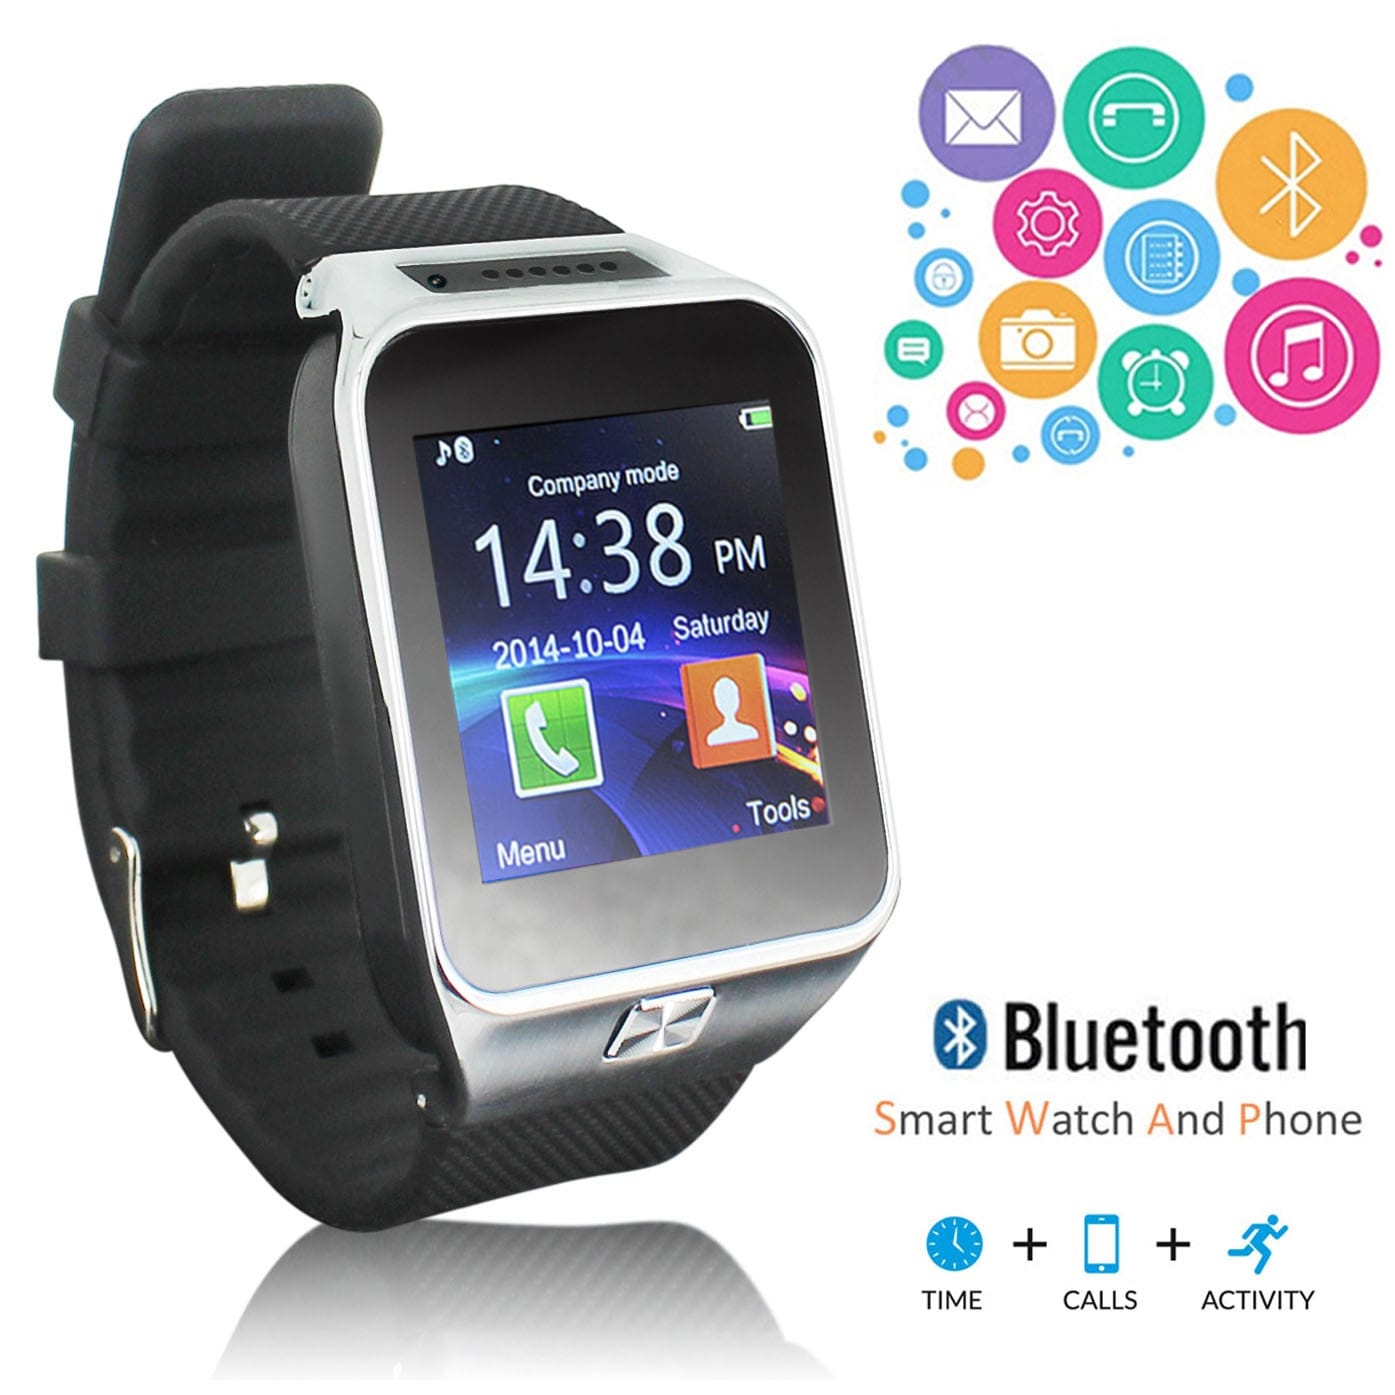 smartwatch that allows phone calls